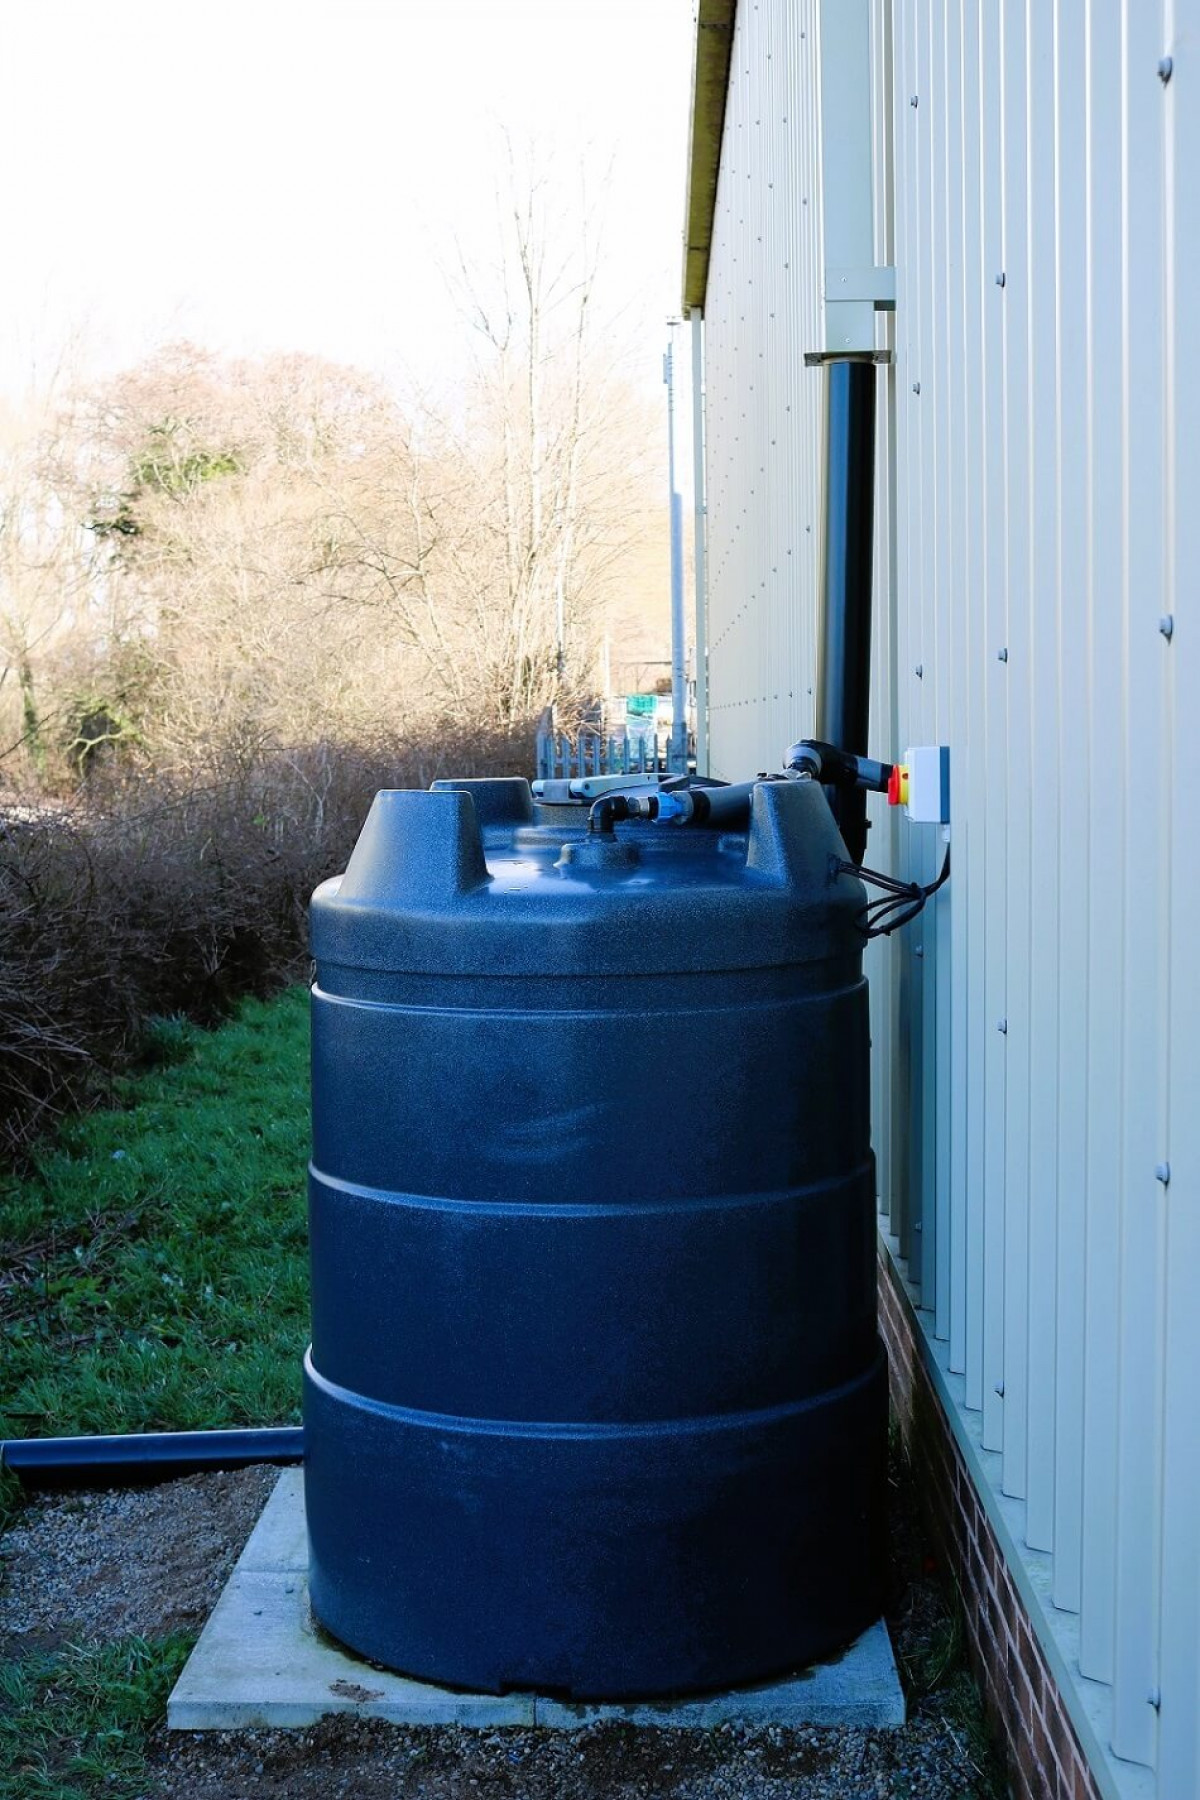 Rainwater Harvesting Tank At Steenbergs Spices Factory